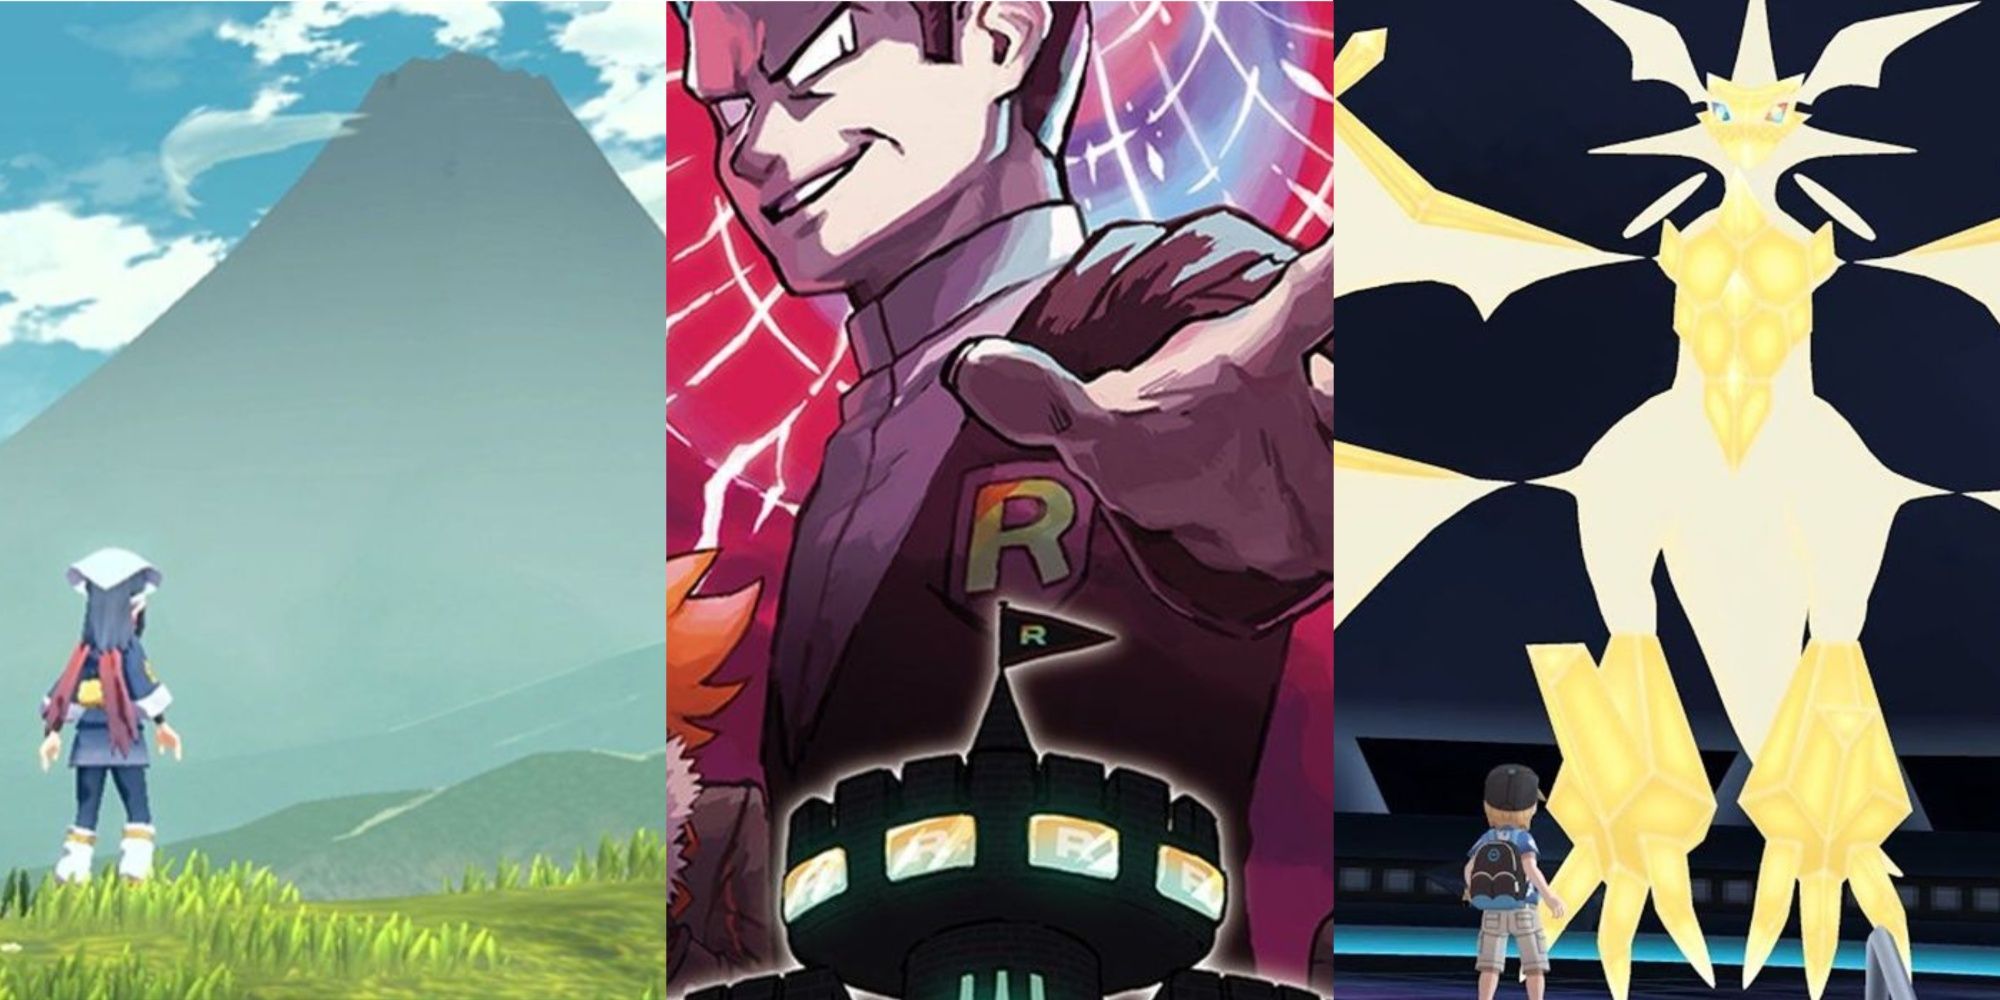 A split image featuring the protagonist of Pokemon legends looking into the distance, artwork of Giovanni, and the Ultra Necrozma fight